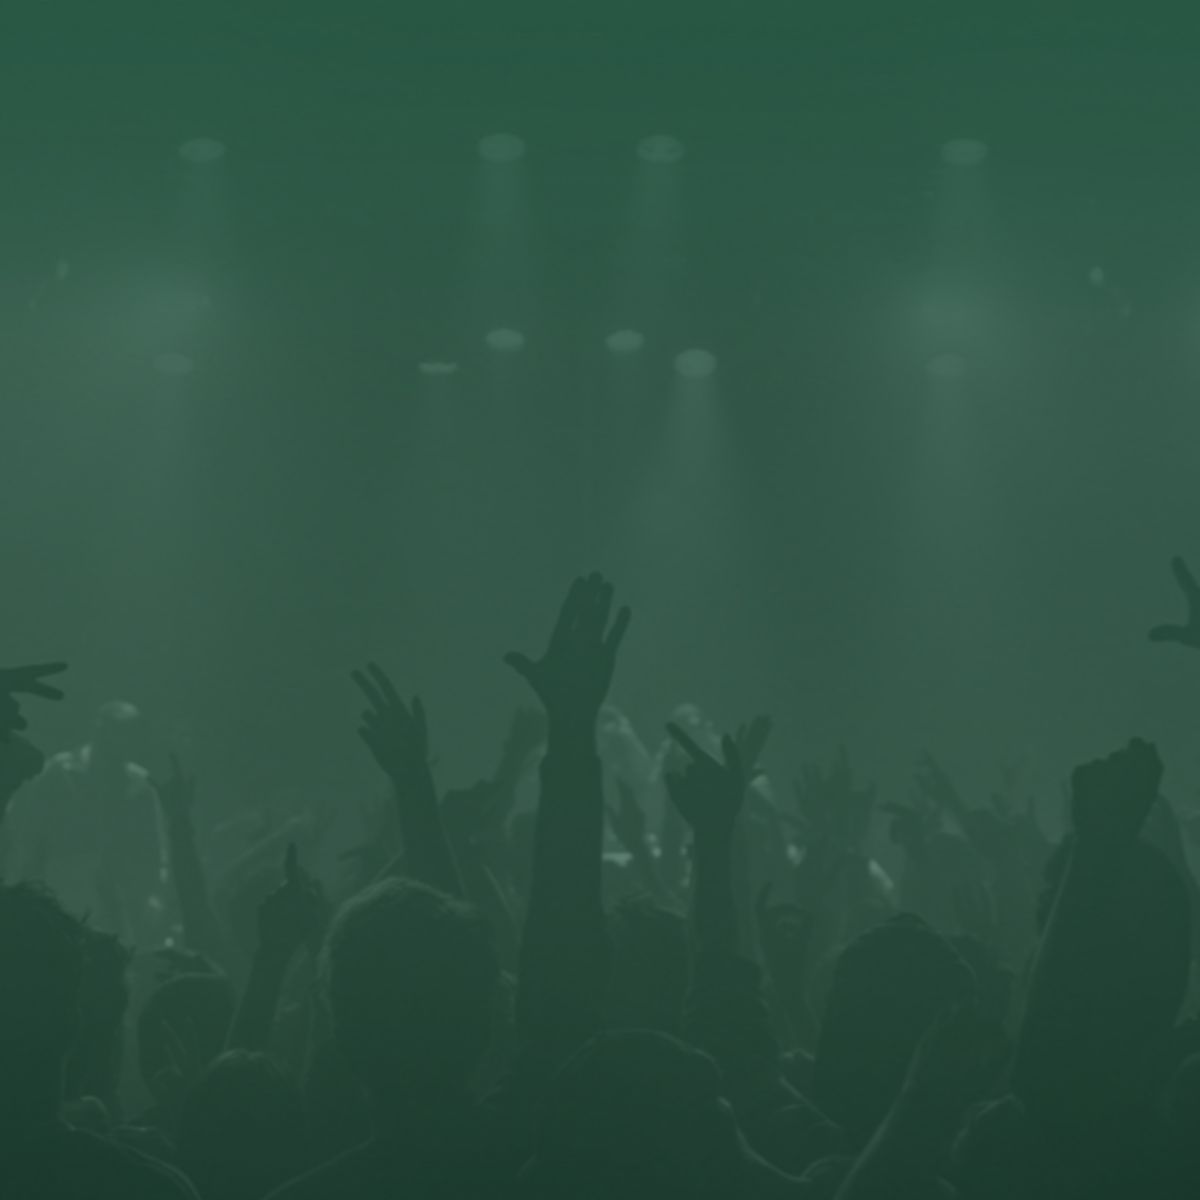 Many people seems to dance with hands in the air, the image has a green gradient.